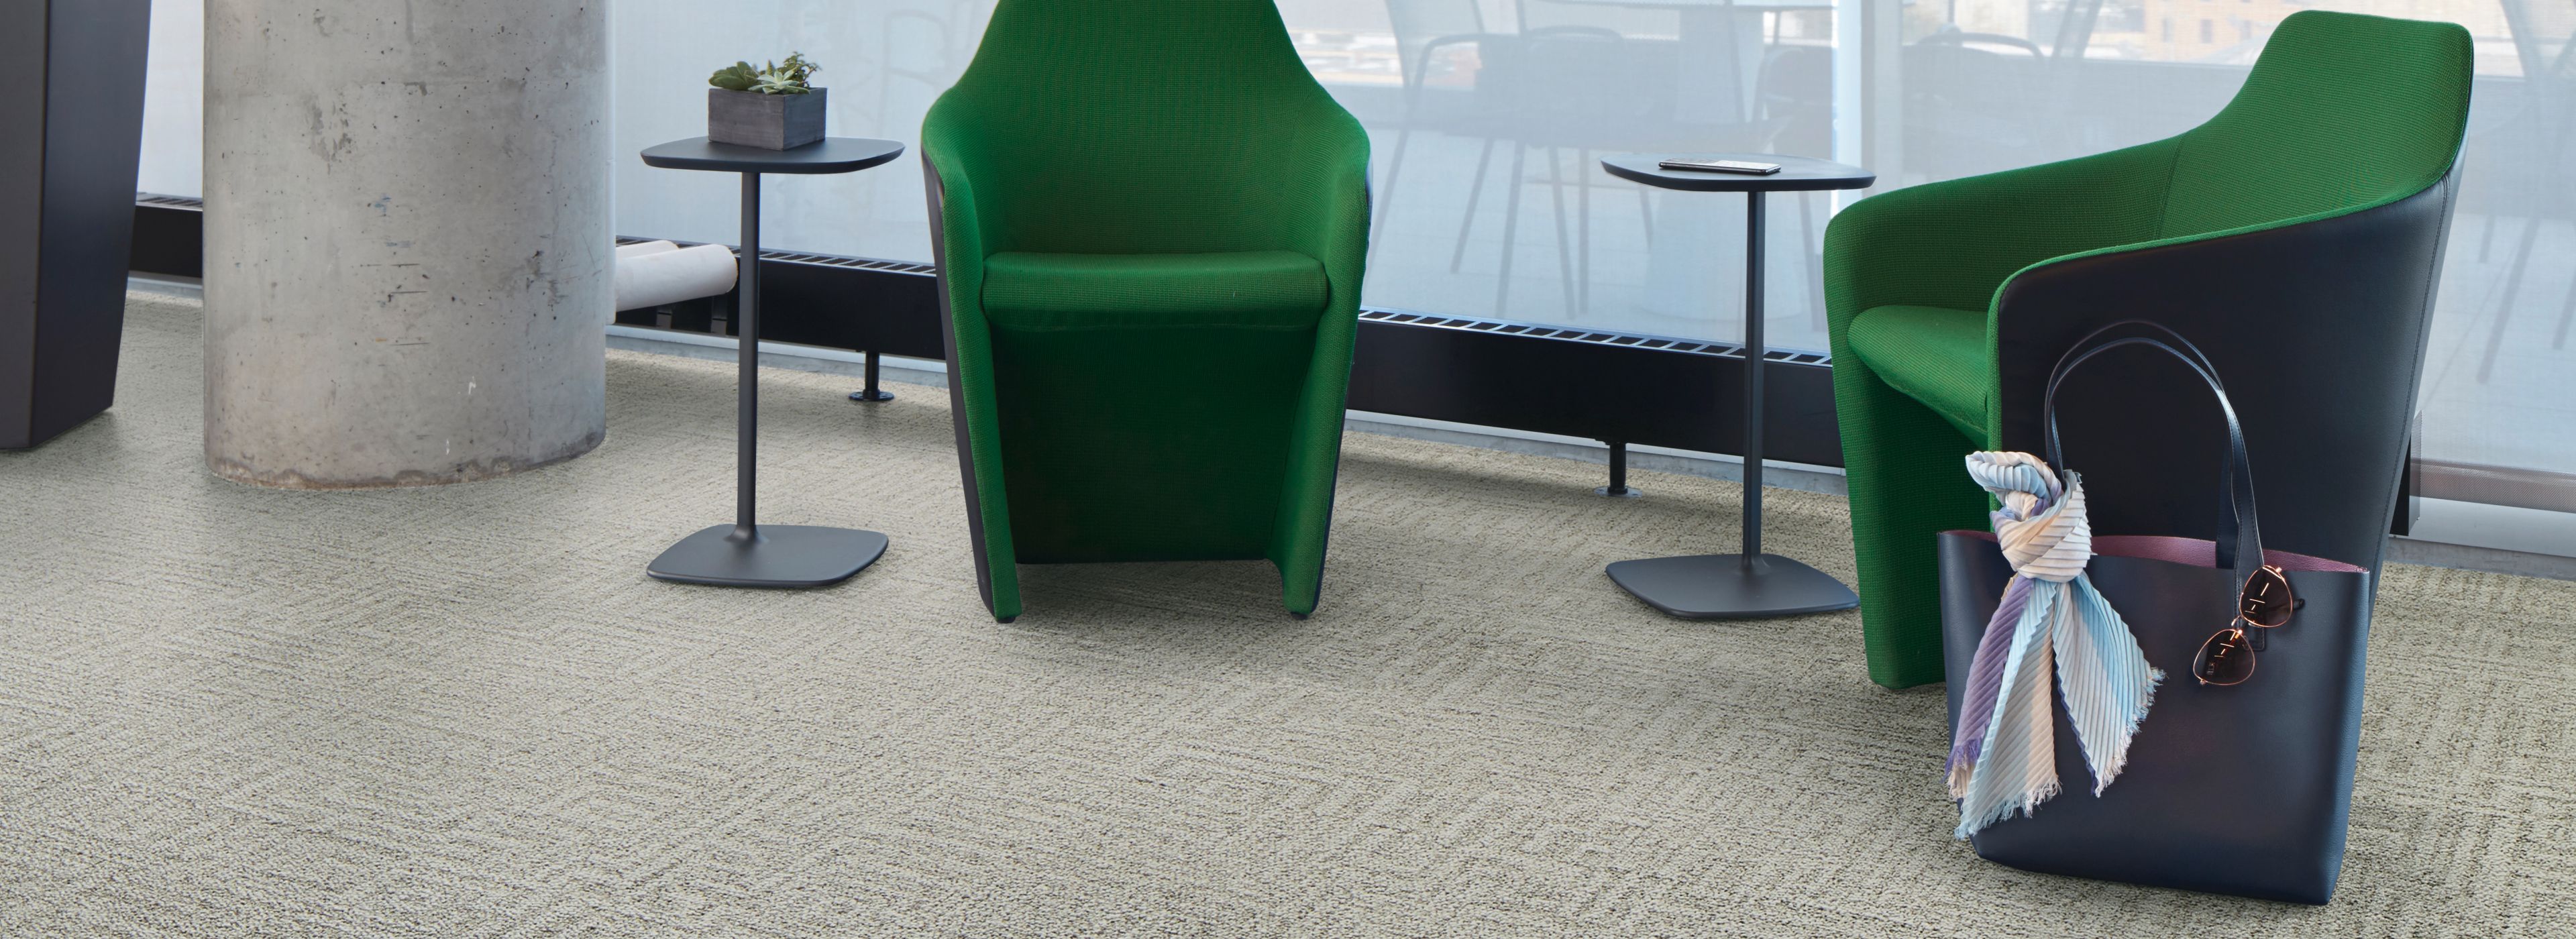 Interface Open Air 413 carpet tile in lounge space with green chairs and cement column numéro d’image 1